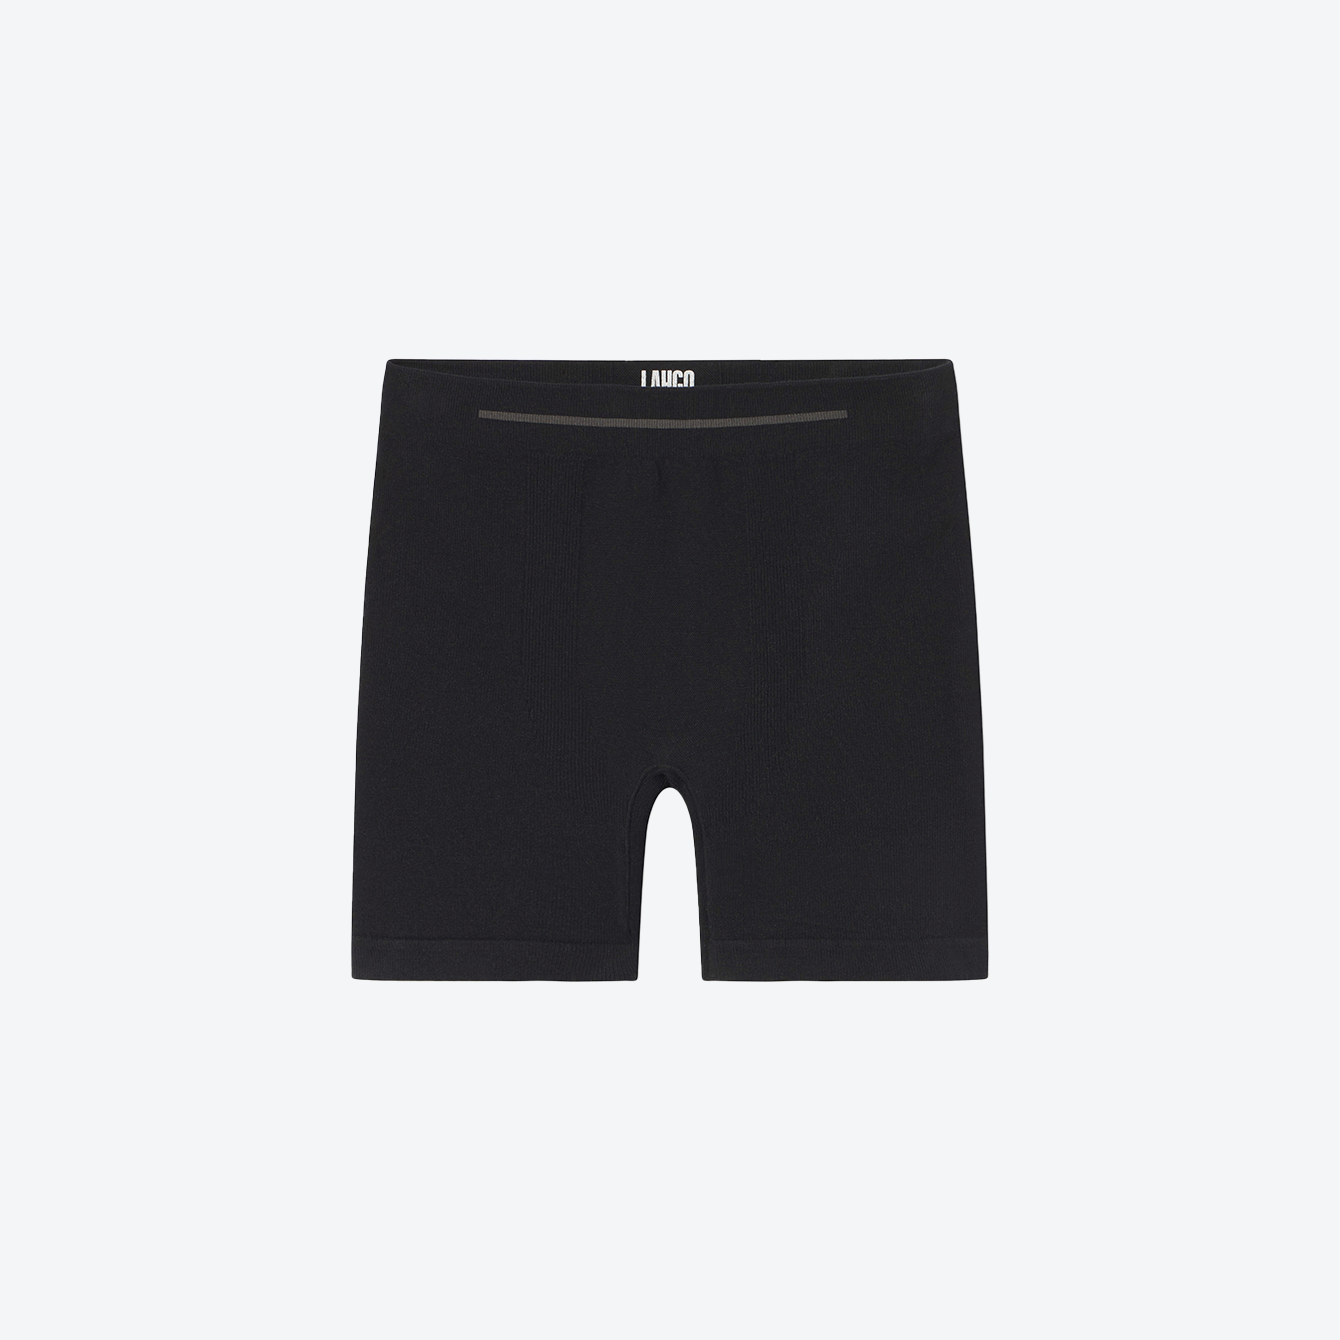 Lahgo Soft Supportive Seamless Modal Boxer Brief - #Immersed Black